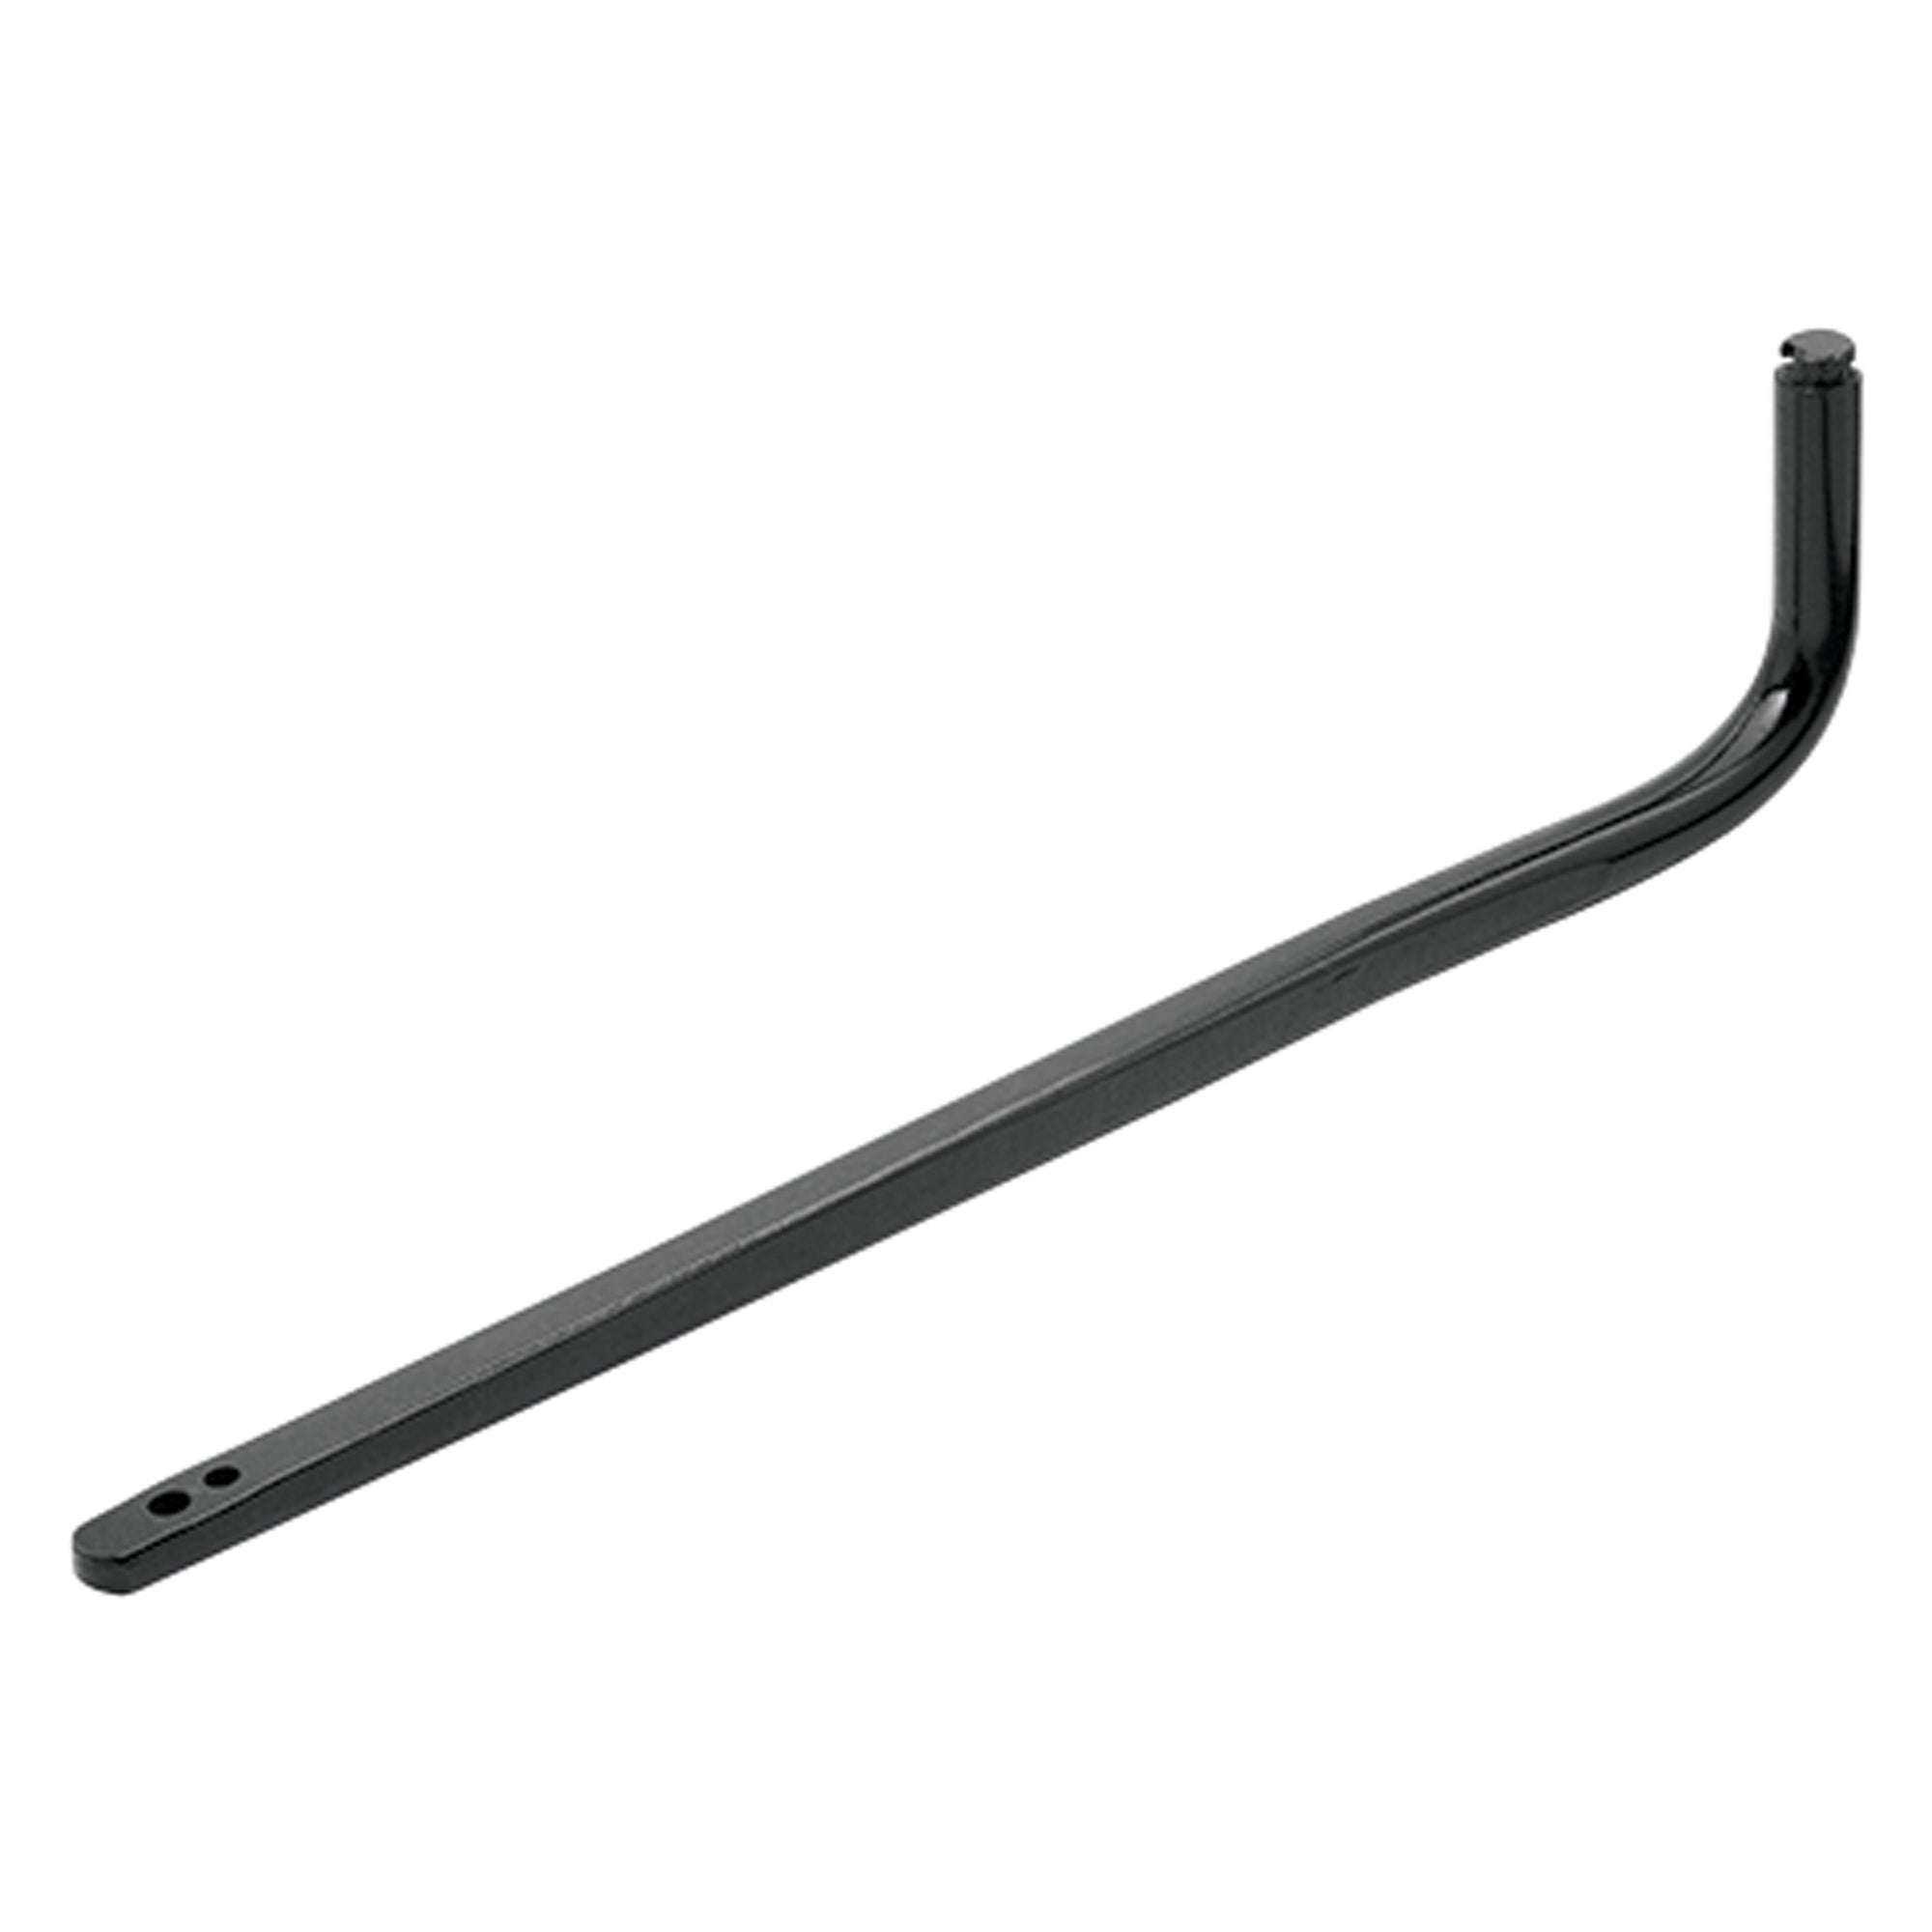 Reese 58336 RB2 Weight Distributing Hitch Spring Bar - 600 lbs.